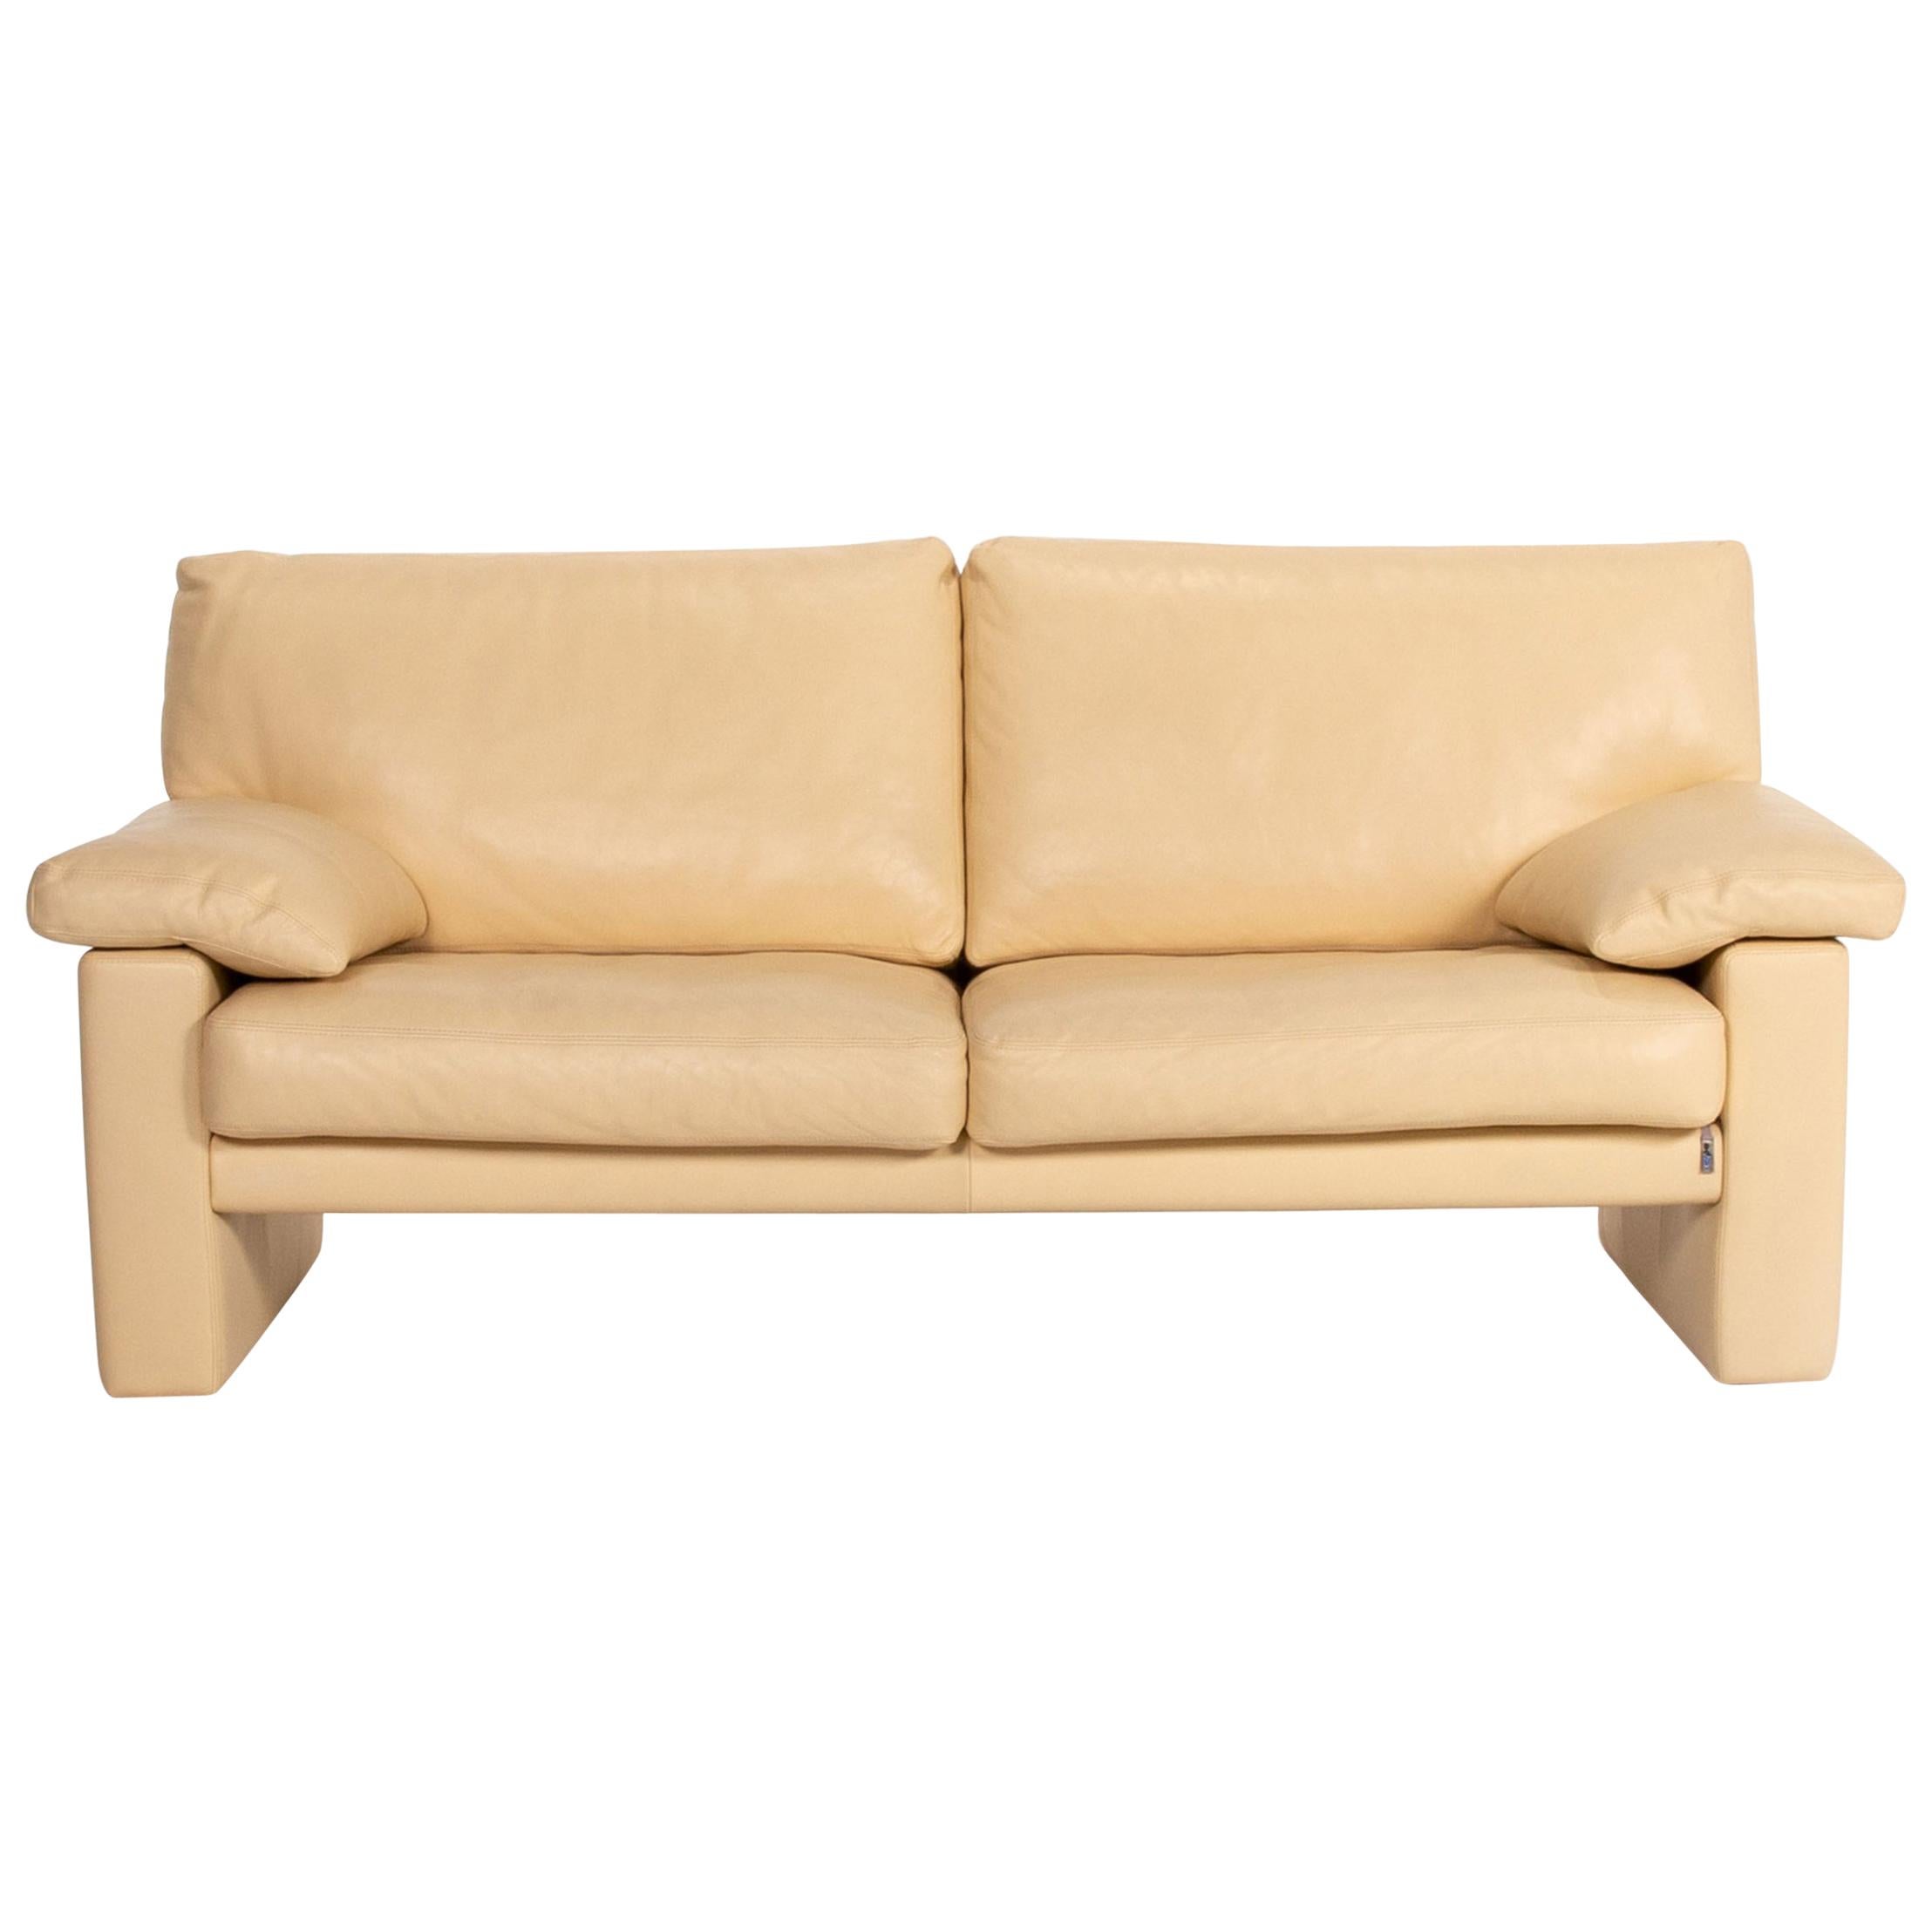 Erpo Leather Sofa Beige Two-Seat Couch For Sale